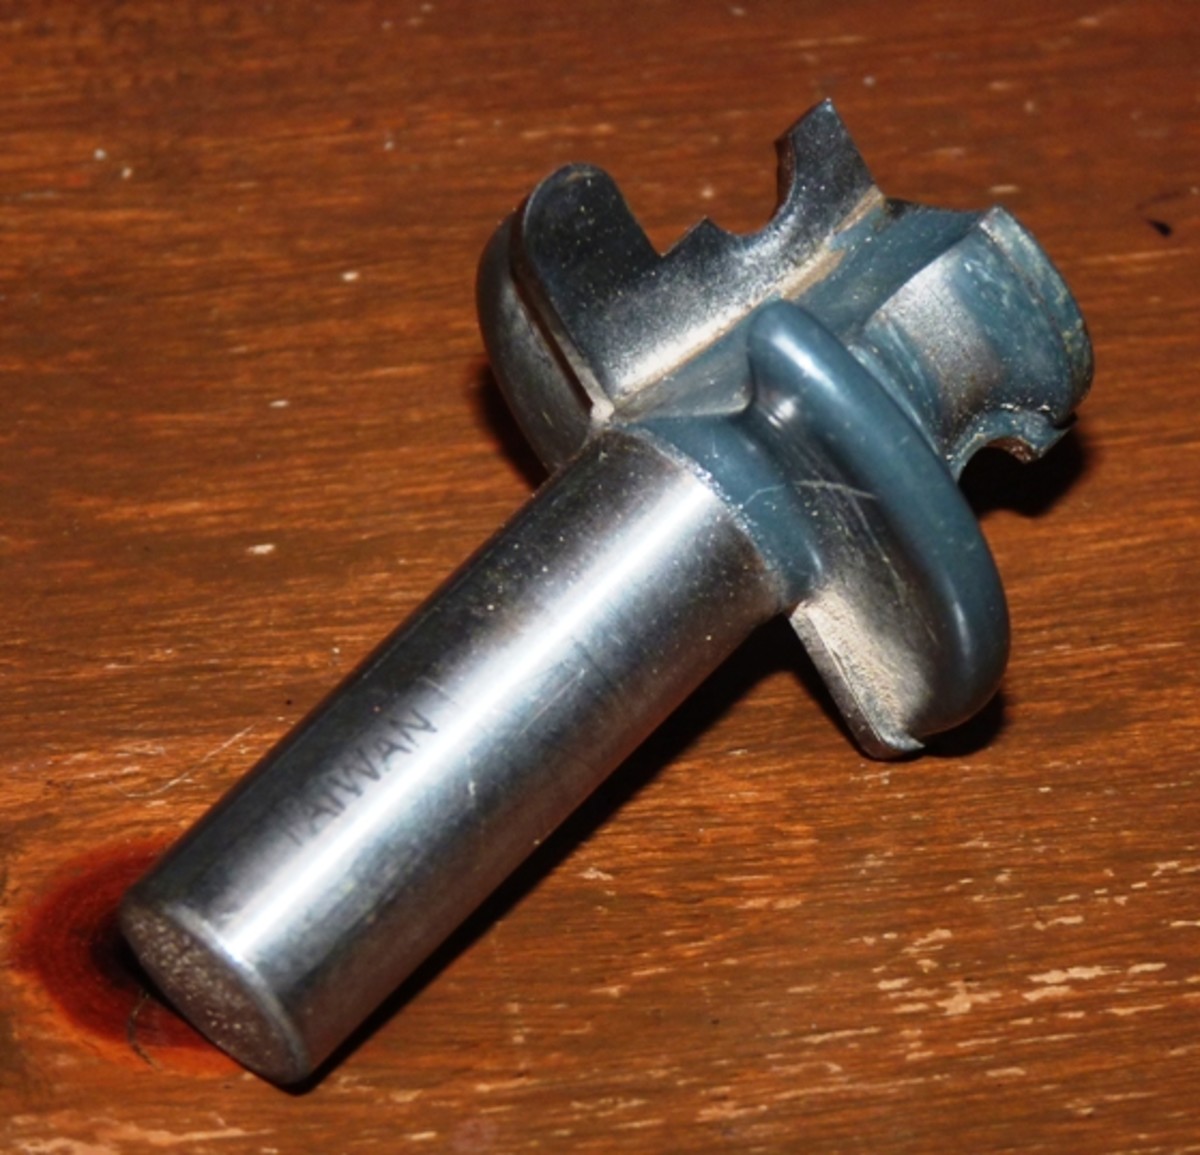 Bead and cove router bit